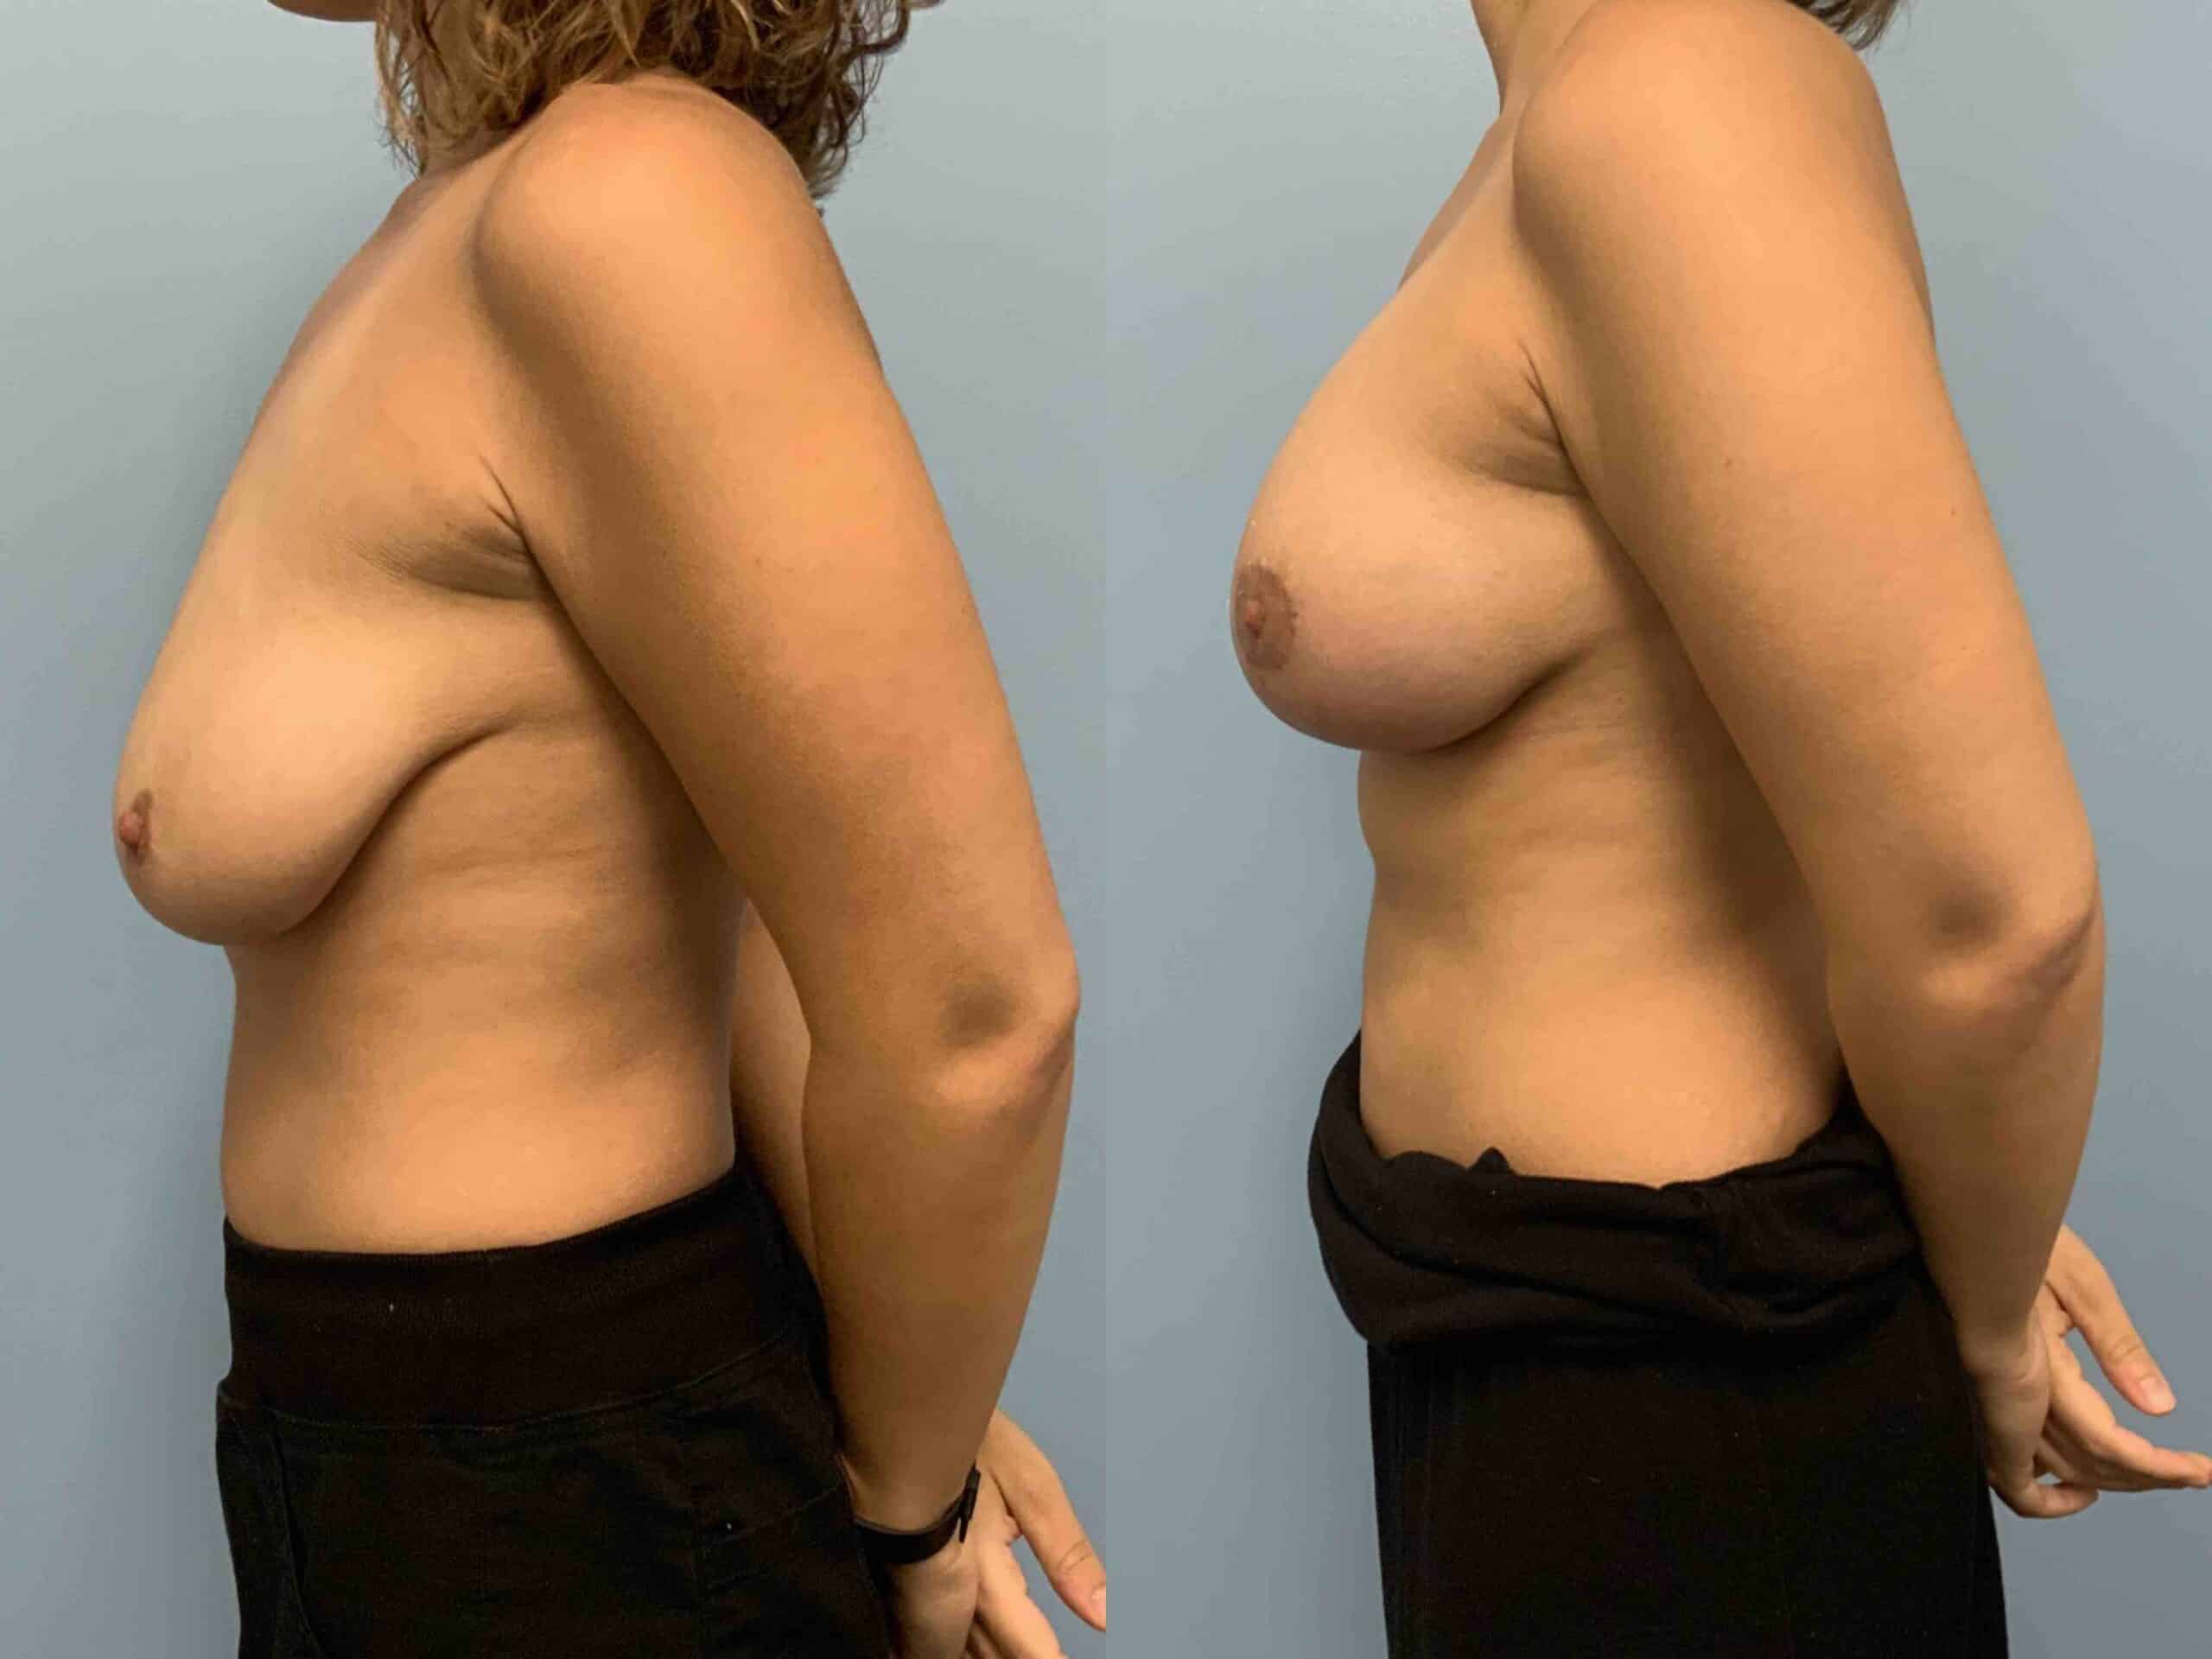 Before and after, 6 mo post op from Breast Augmentation with Breast Lift/Mastopexy & Galaflex Reinforcement performed by Dr. Paul Vanek (side view)